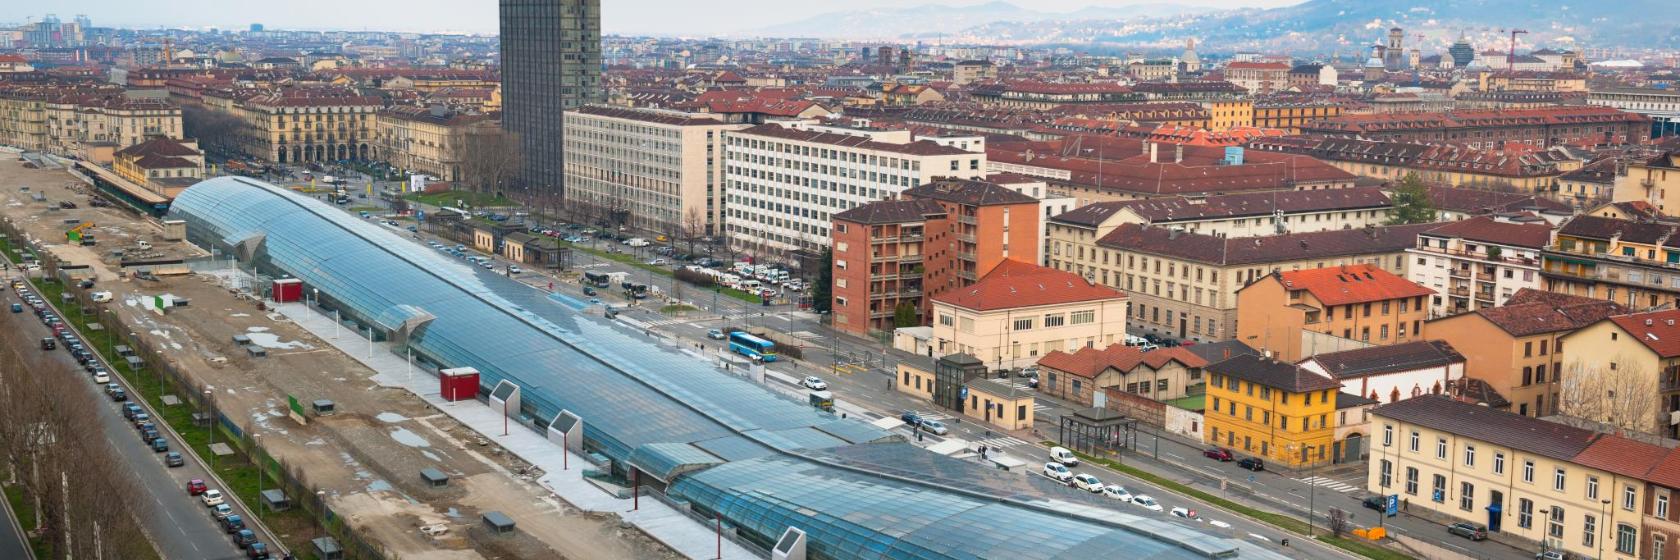 The 10 best hotels near Porta Susa Train Station in Turin, Italy